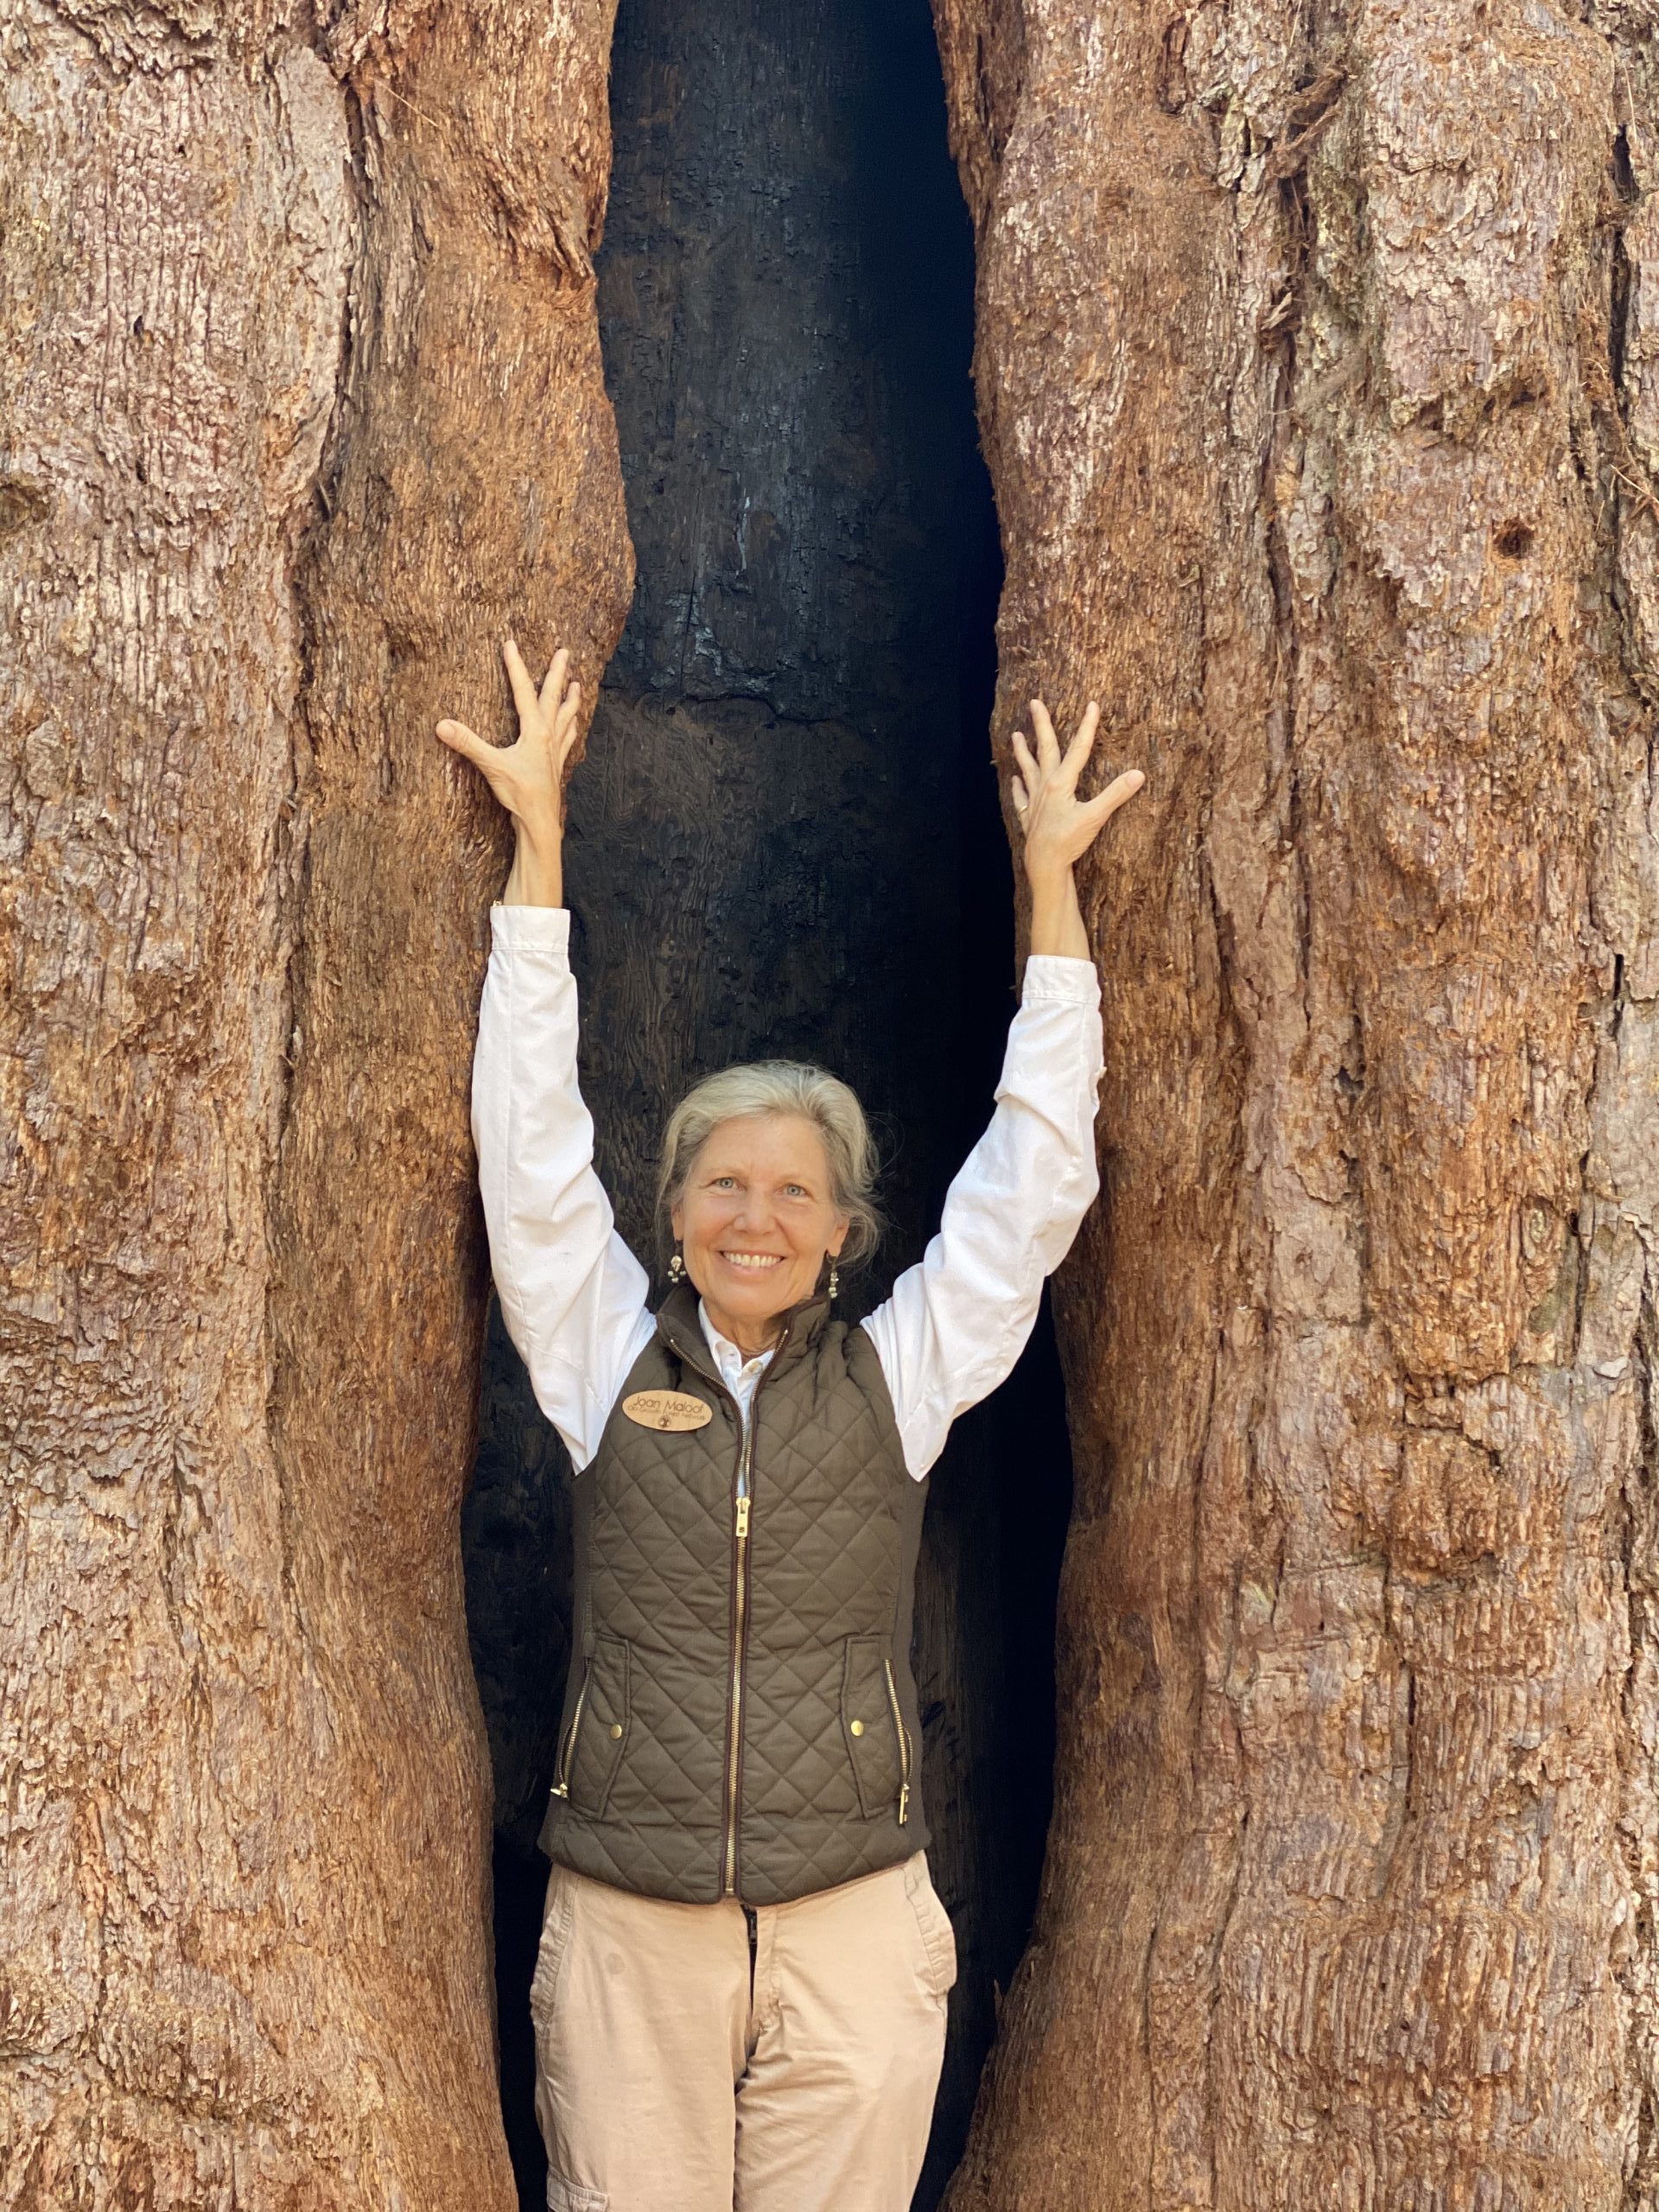 She Founded an Organization that would Identify Old- Growth Forests and Save them from Depletion